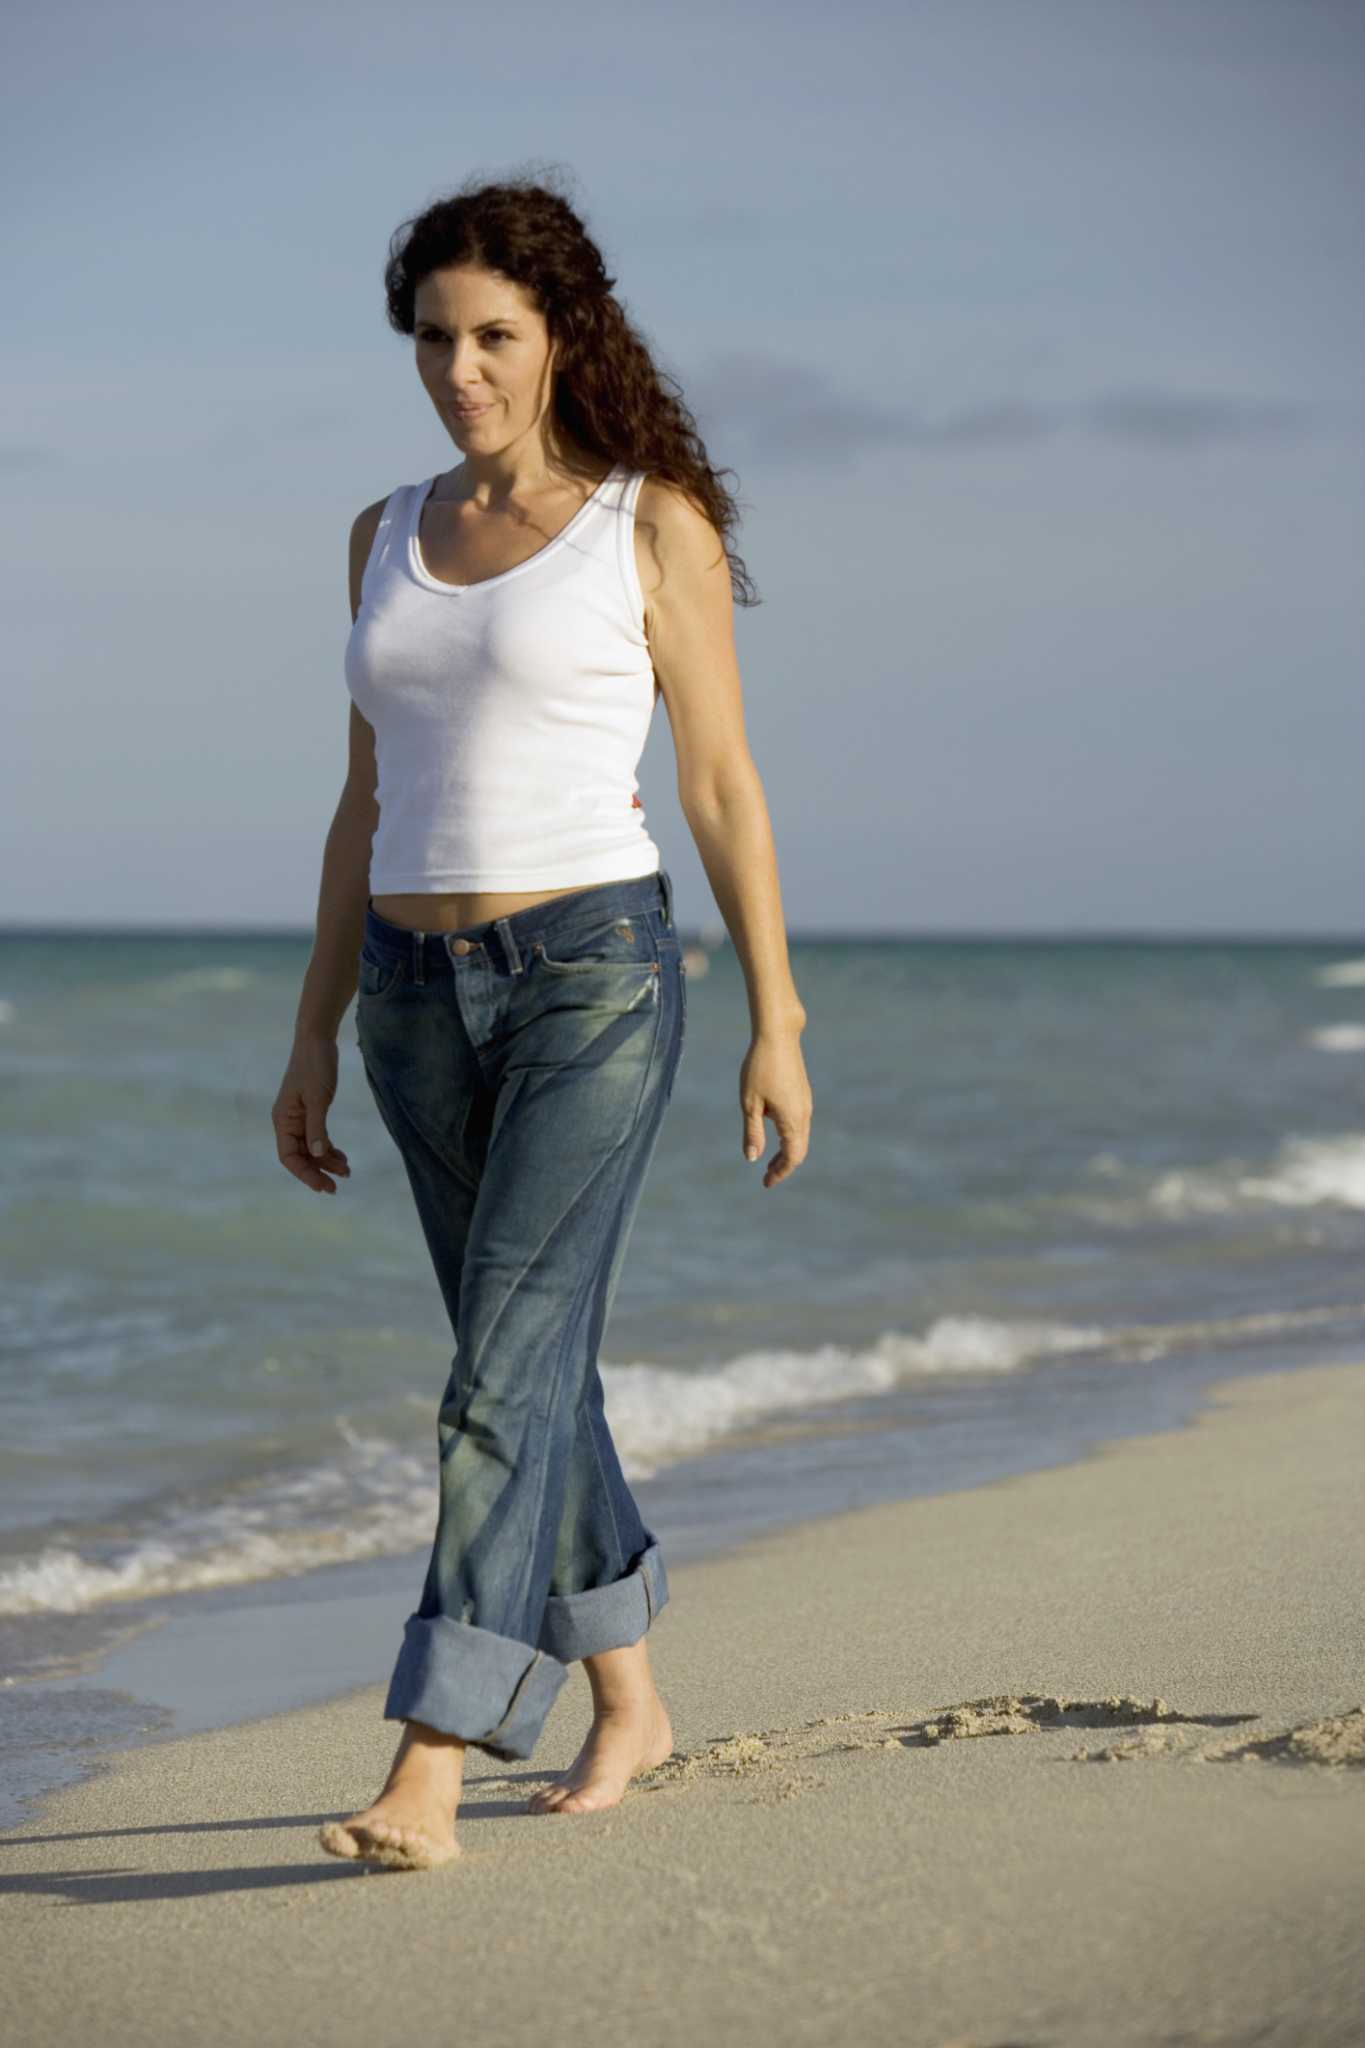 Benefits of Walking on the Beach Barefoot - Atlantic View